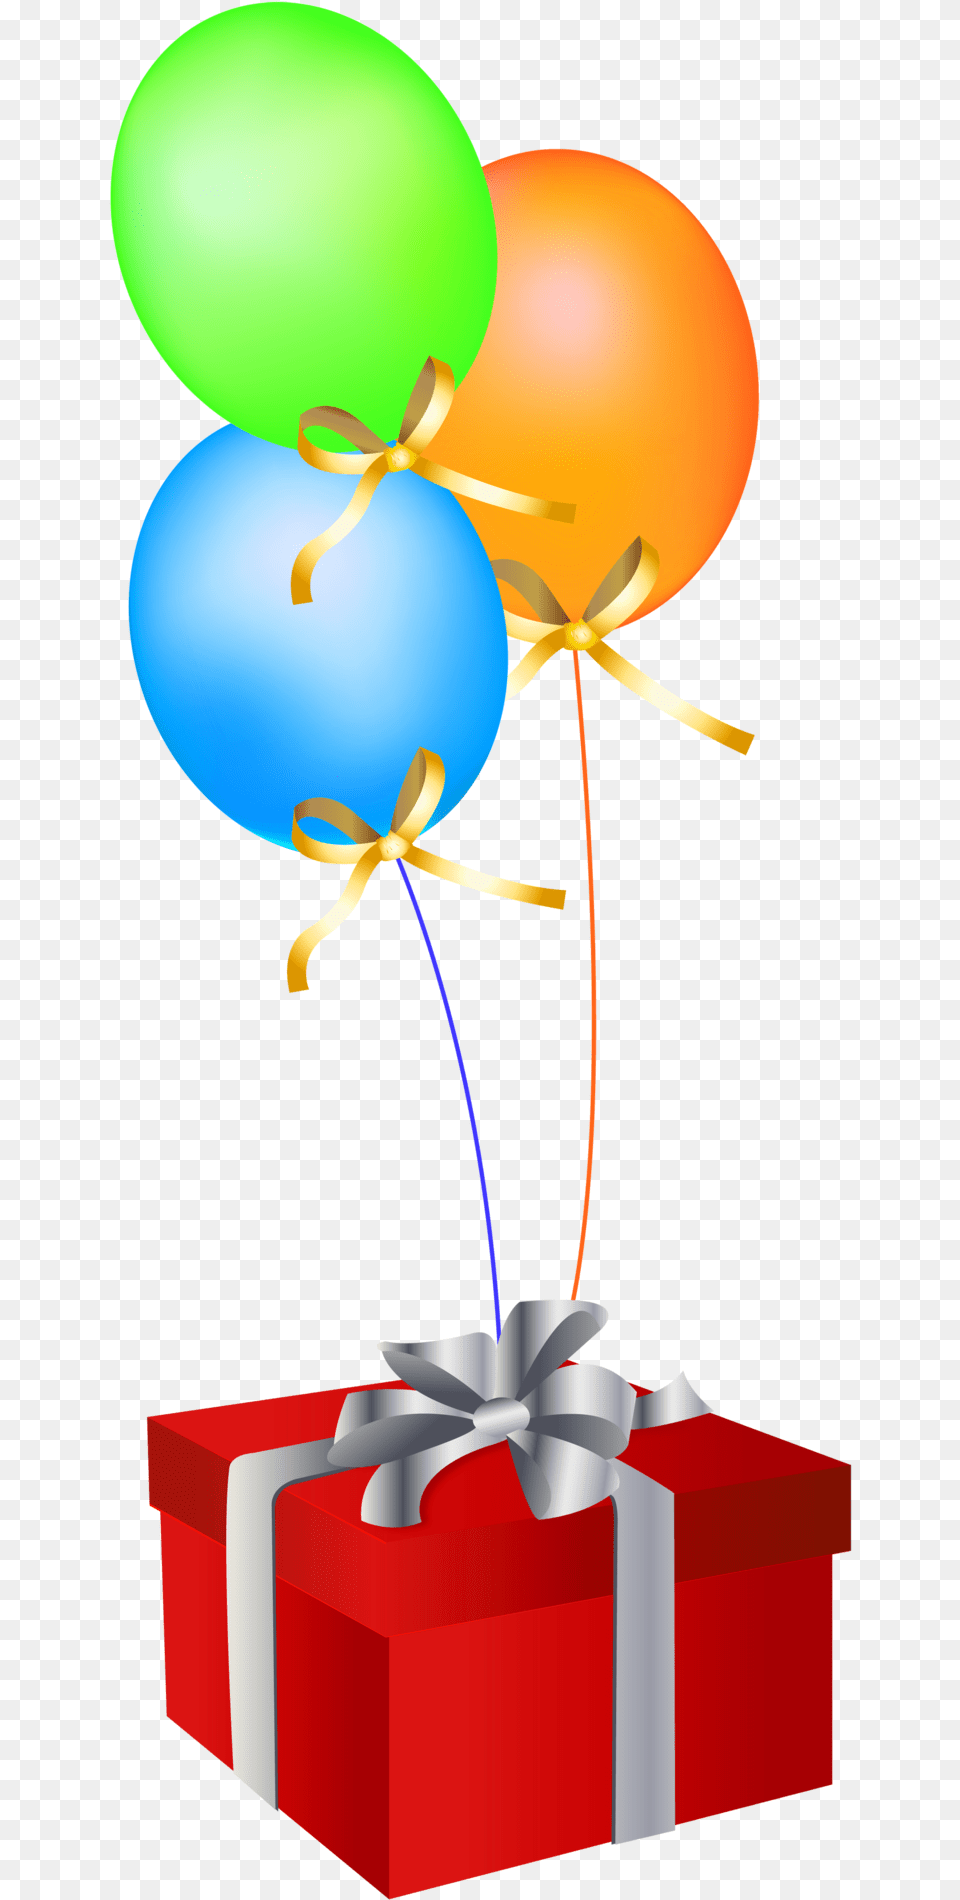 Red Gift Box With Balloons Images Transparent Gift Box And Balloon Png Image